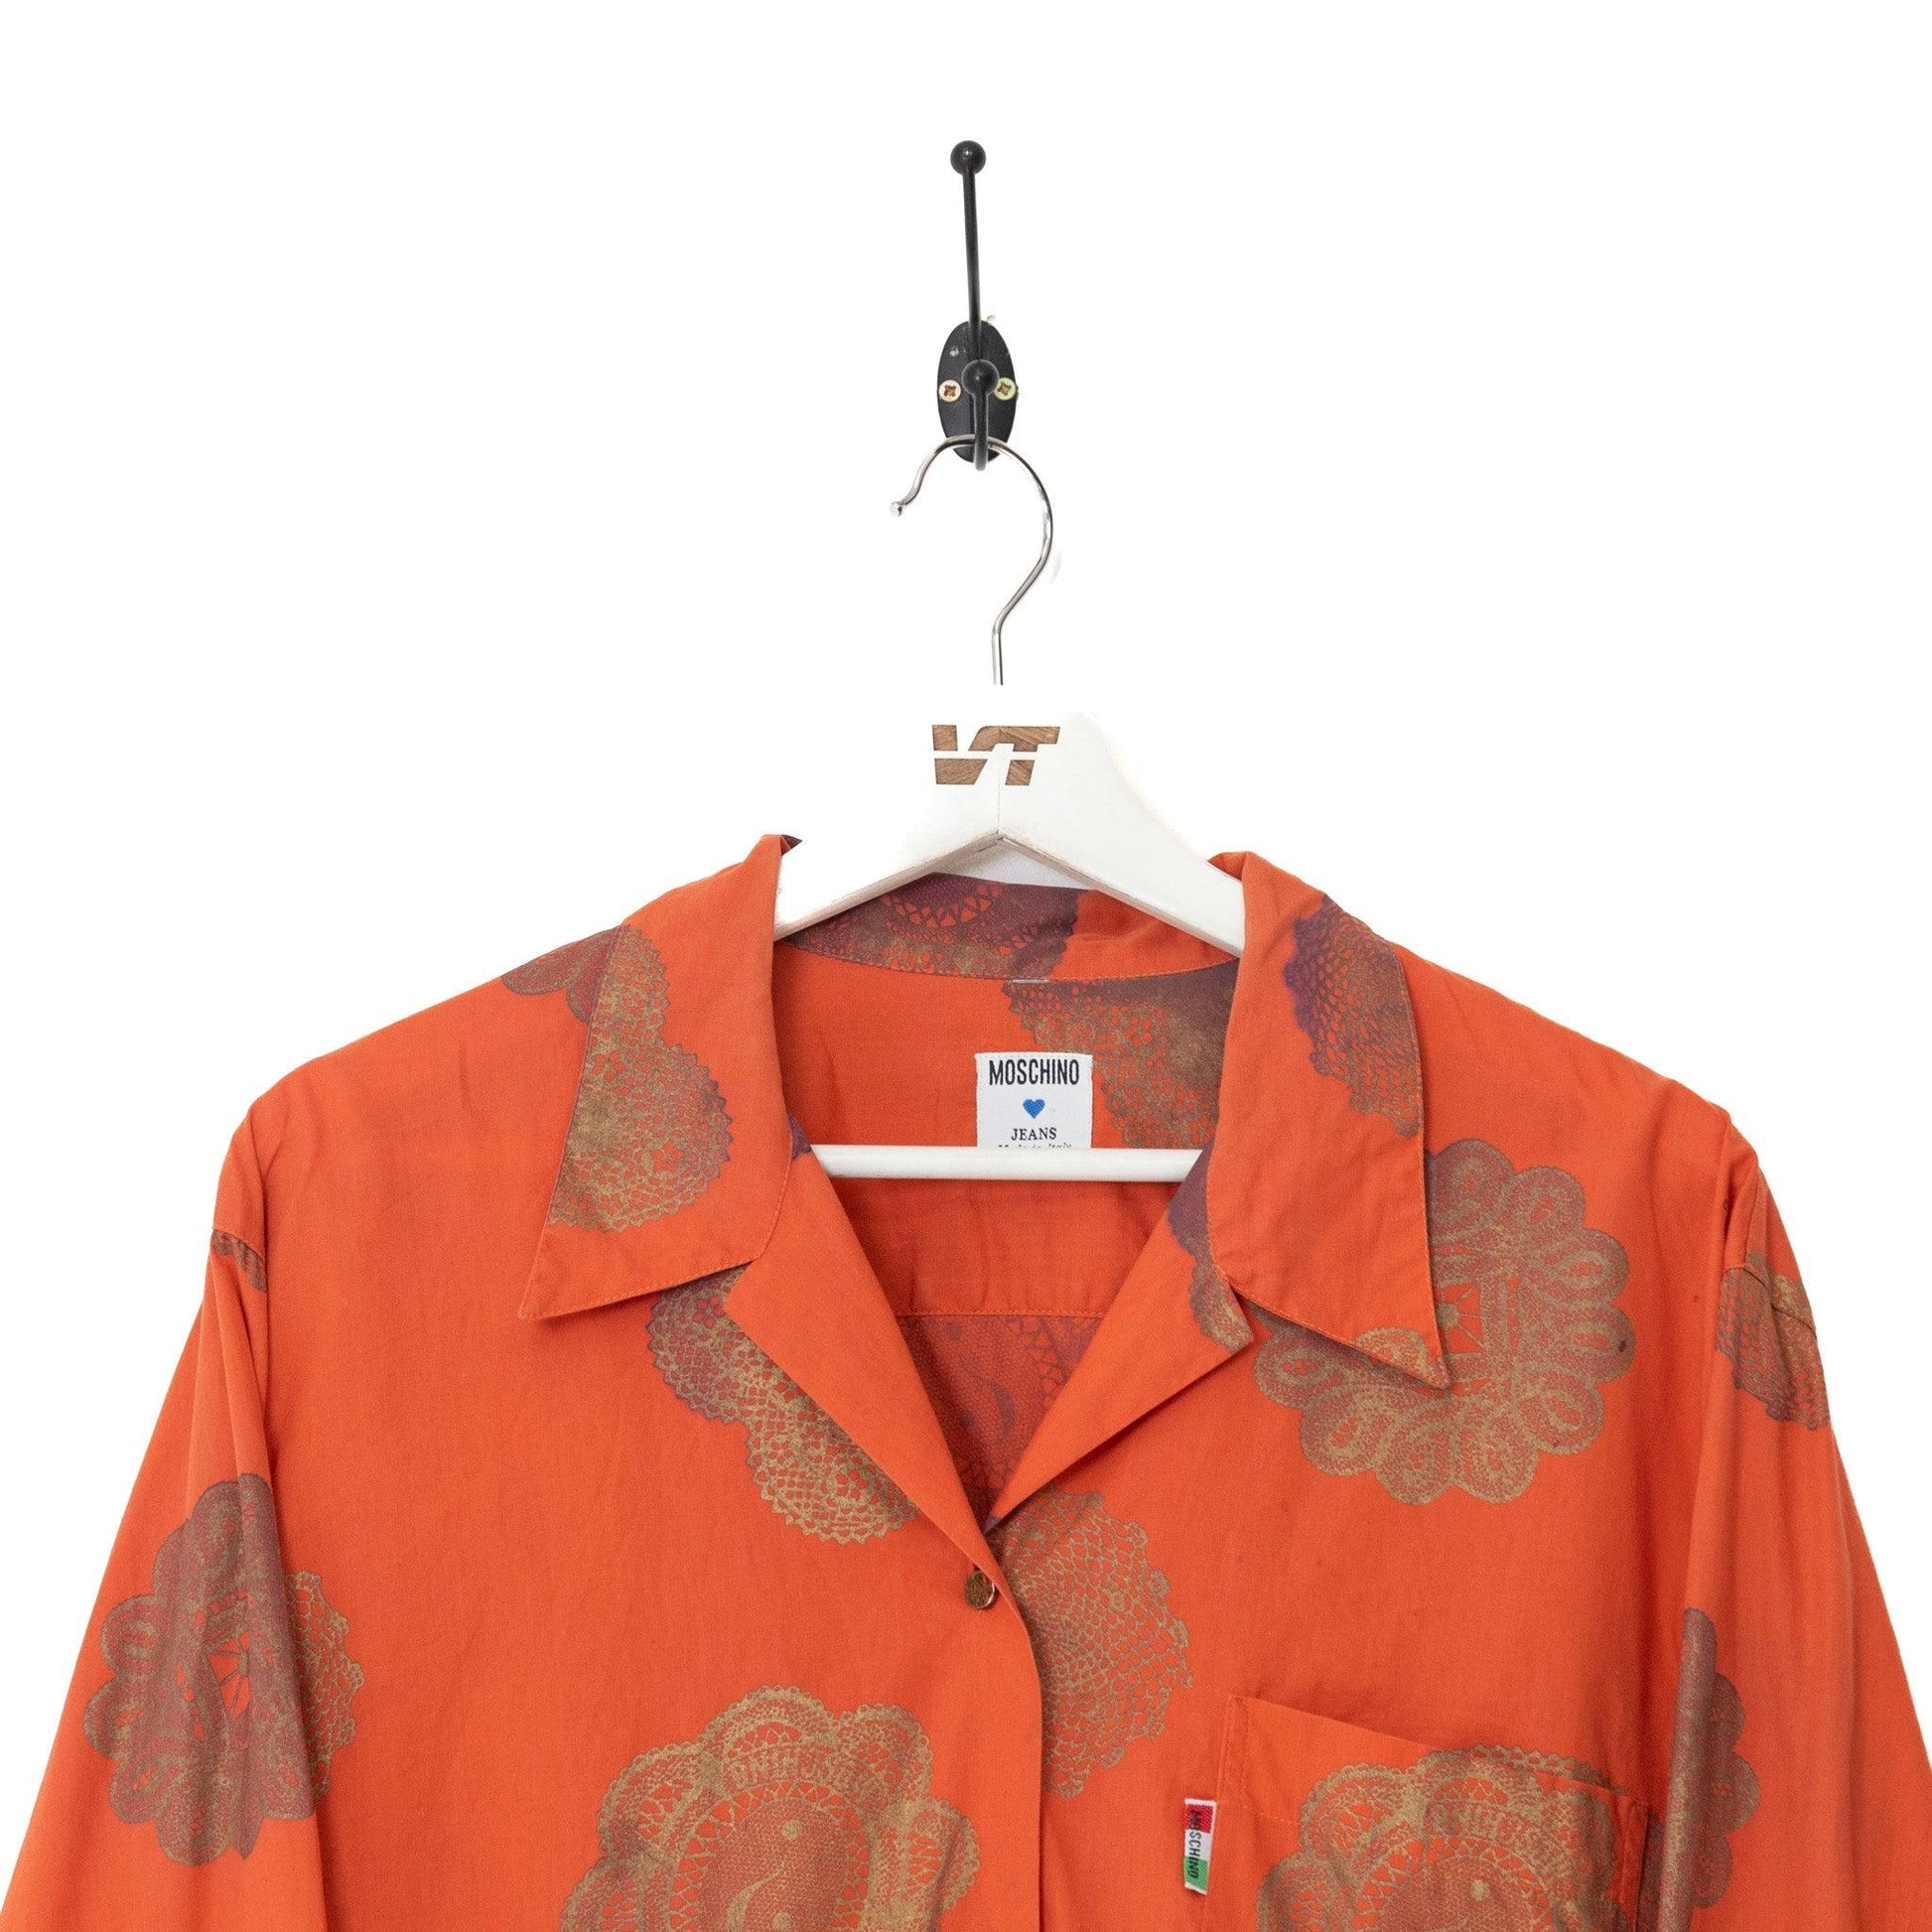 Moschino Jeans Paisley Print Button Up LS Shirt - Known Source